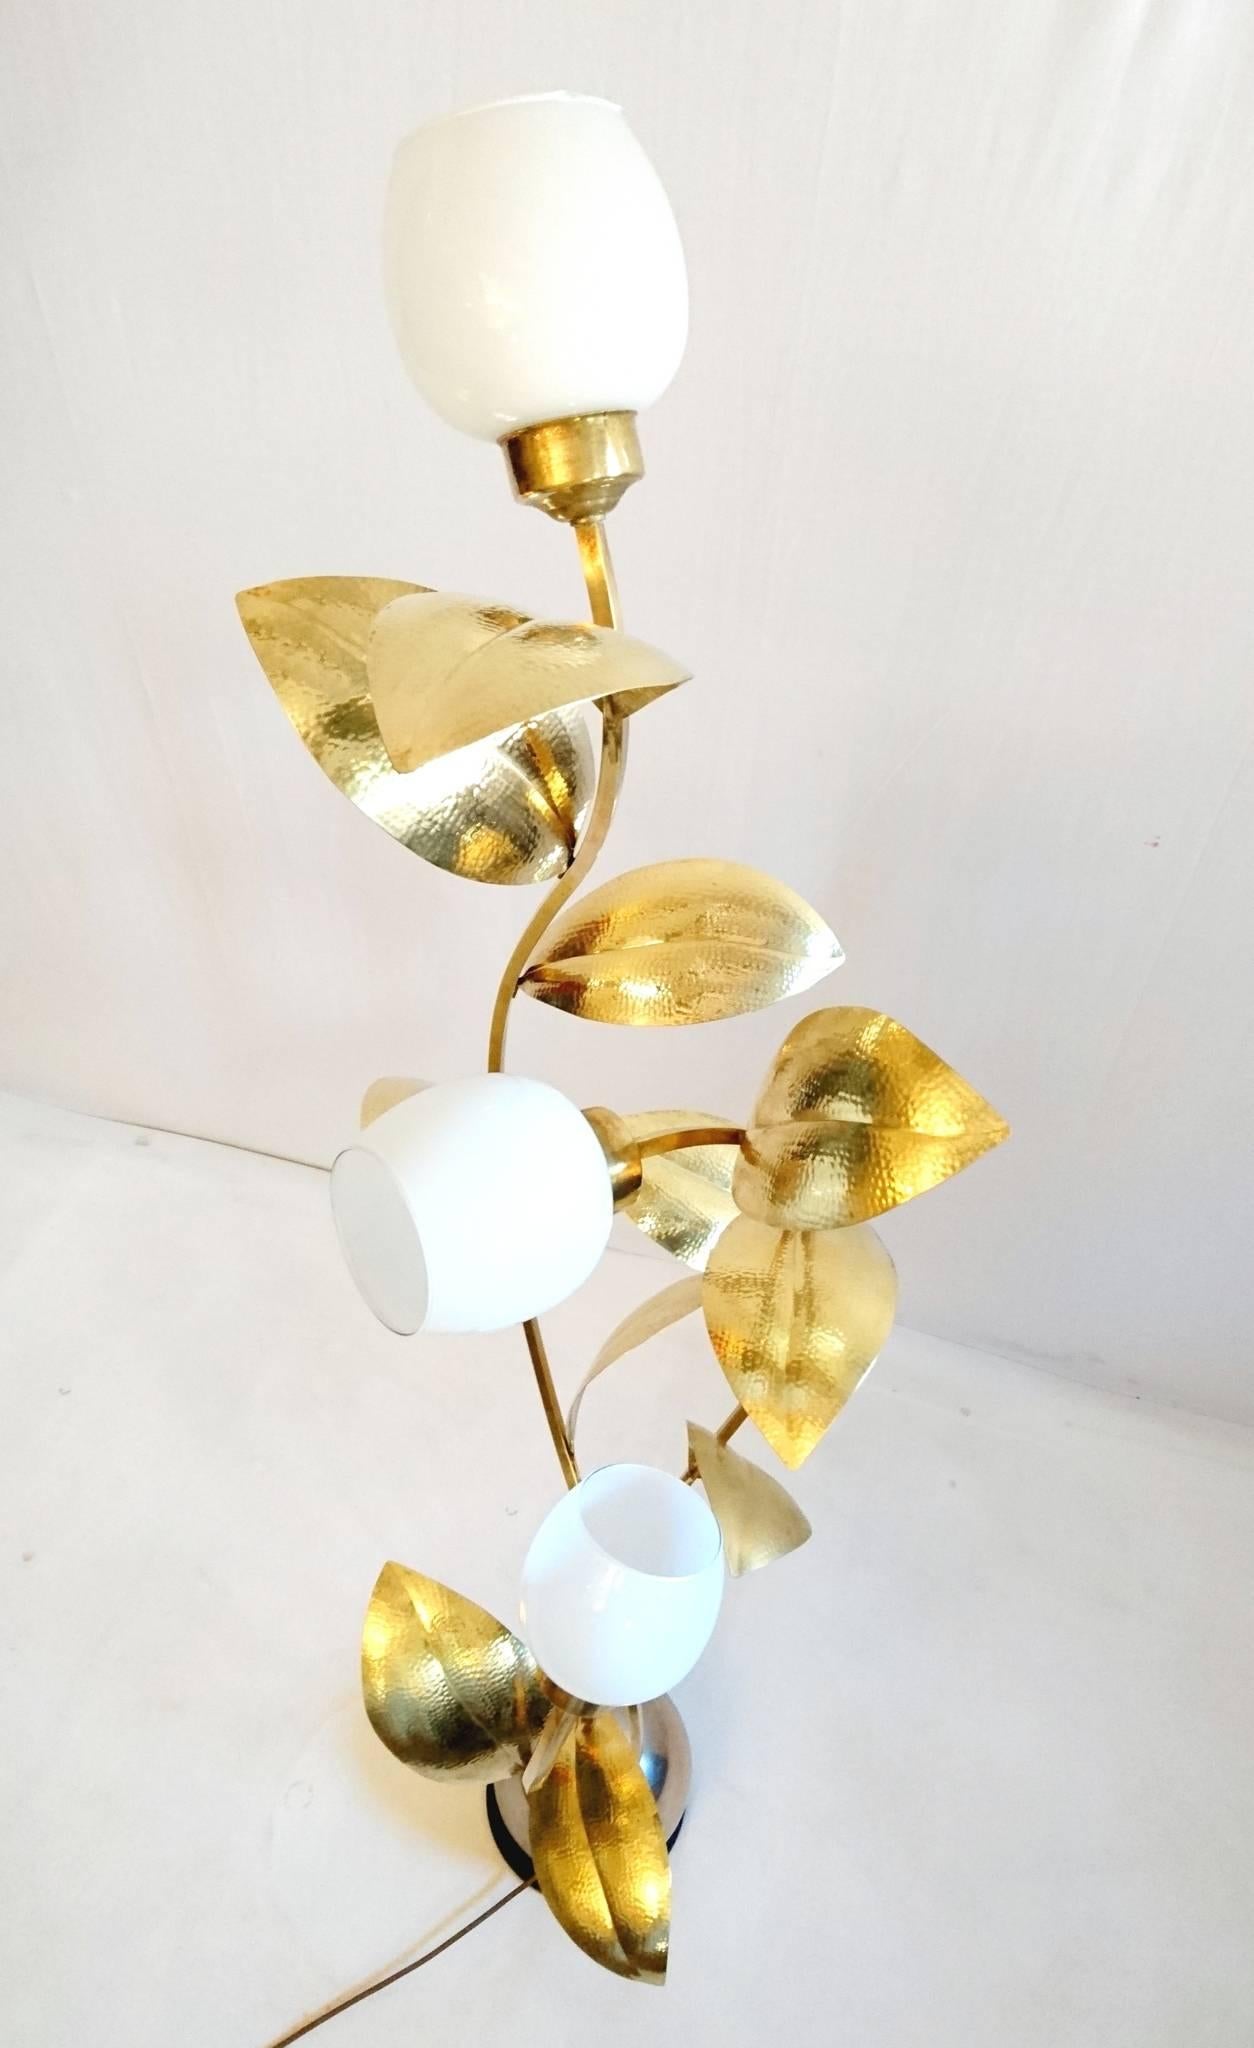 Floor lamp with three stems attached to a round ball, adorned with handmade brass leaves and white glass shades. The leaves are marked AG.